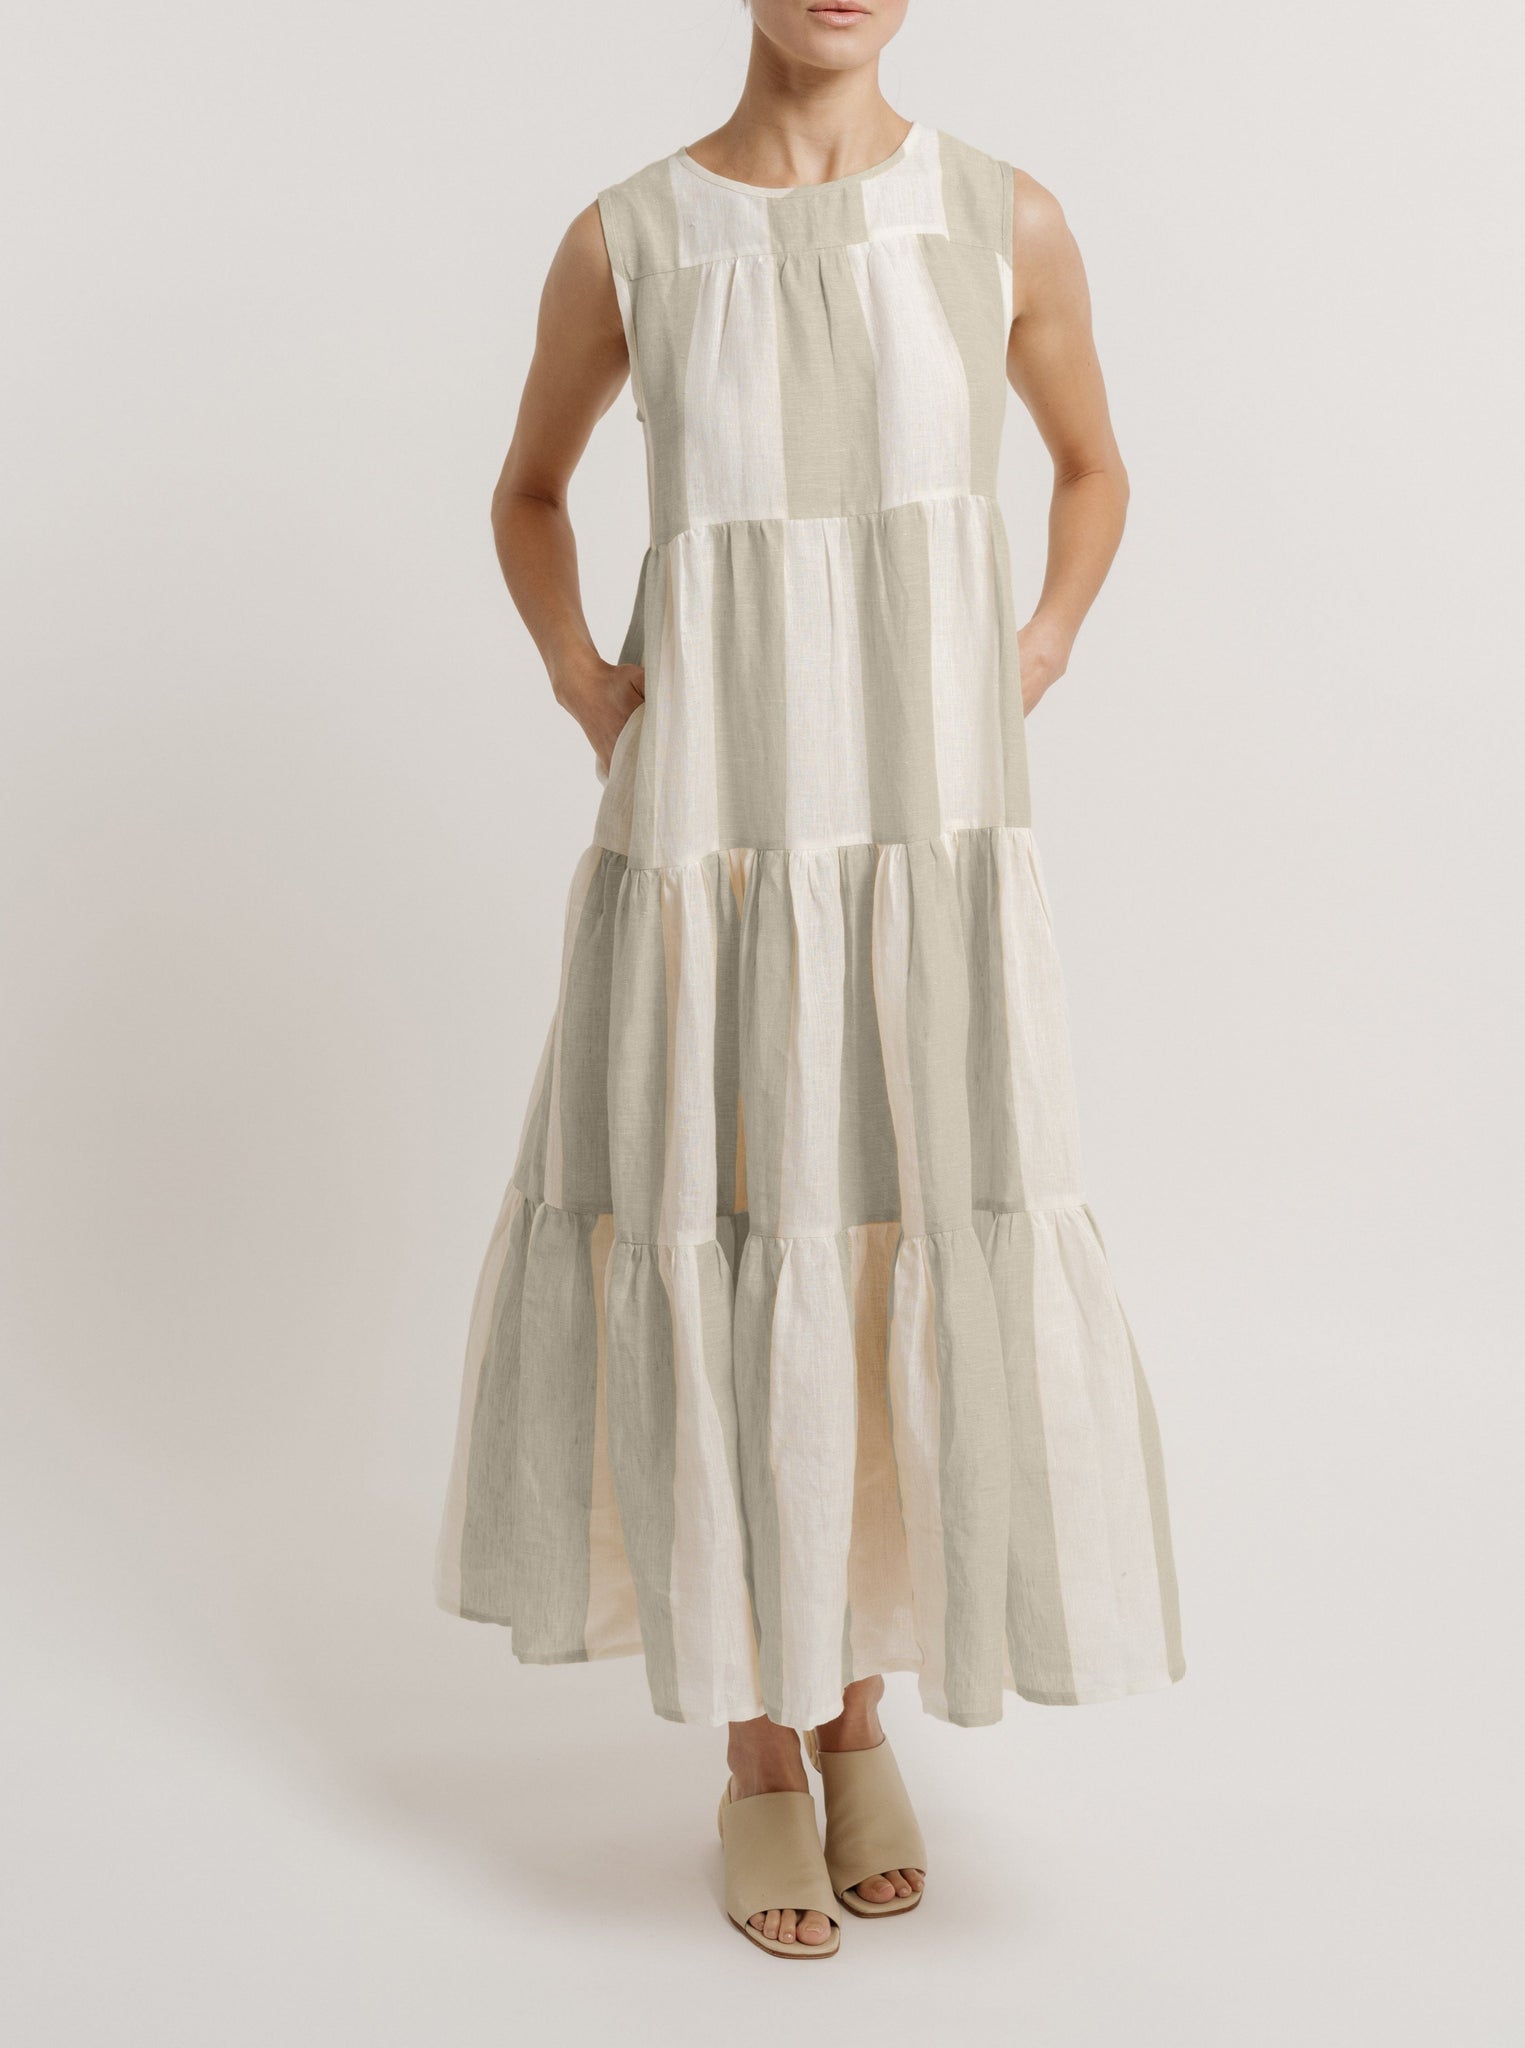 A woman wearing a sleeveless, white and grey Tiered Linen Maxi Dress - Tulum Stripe.